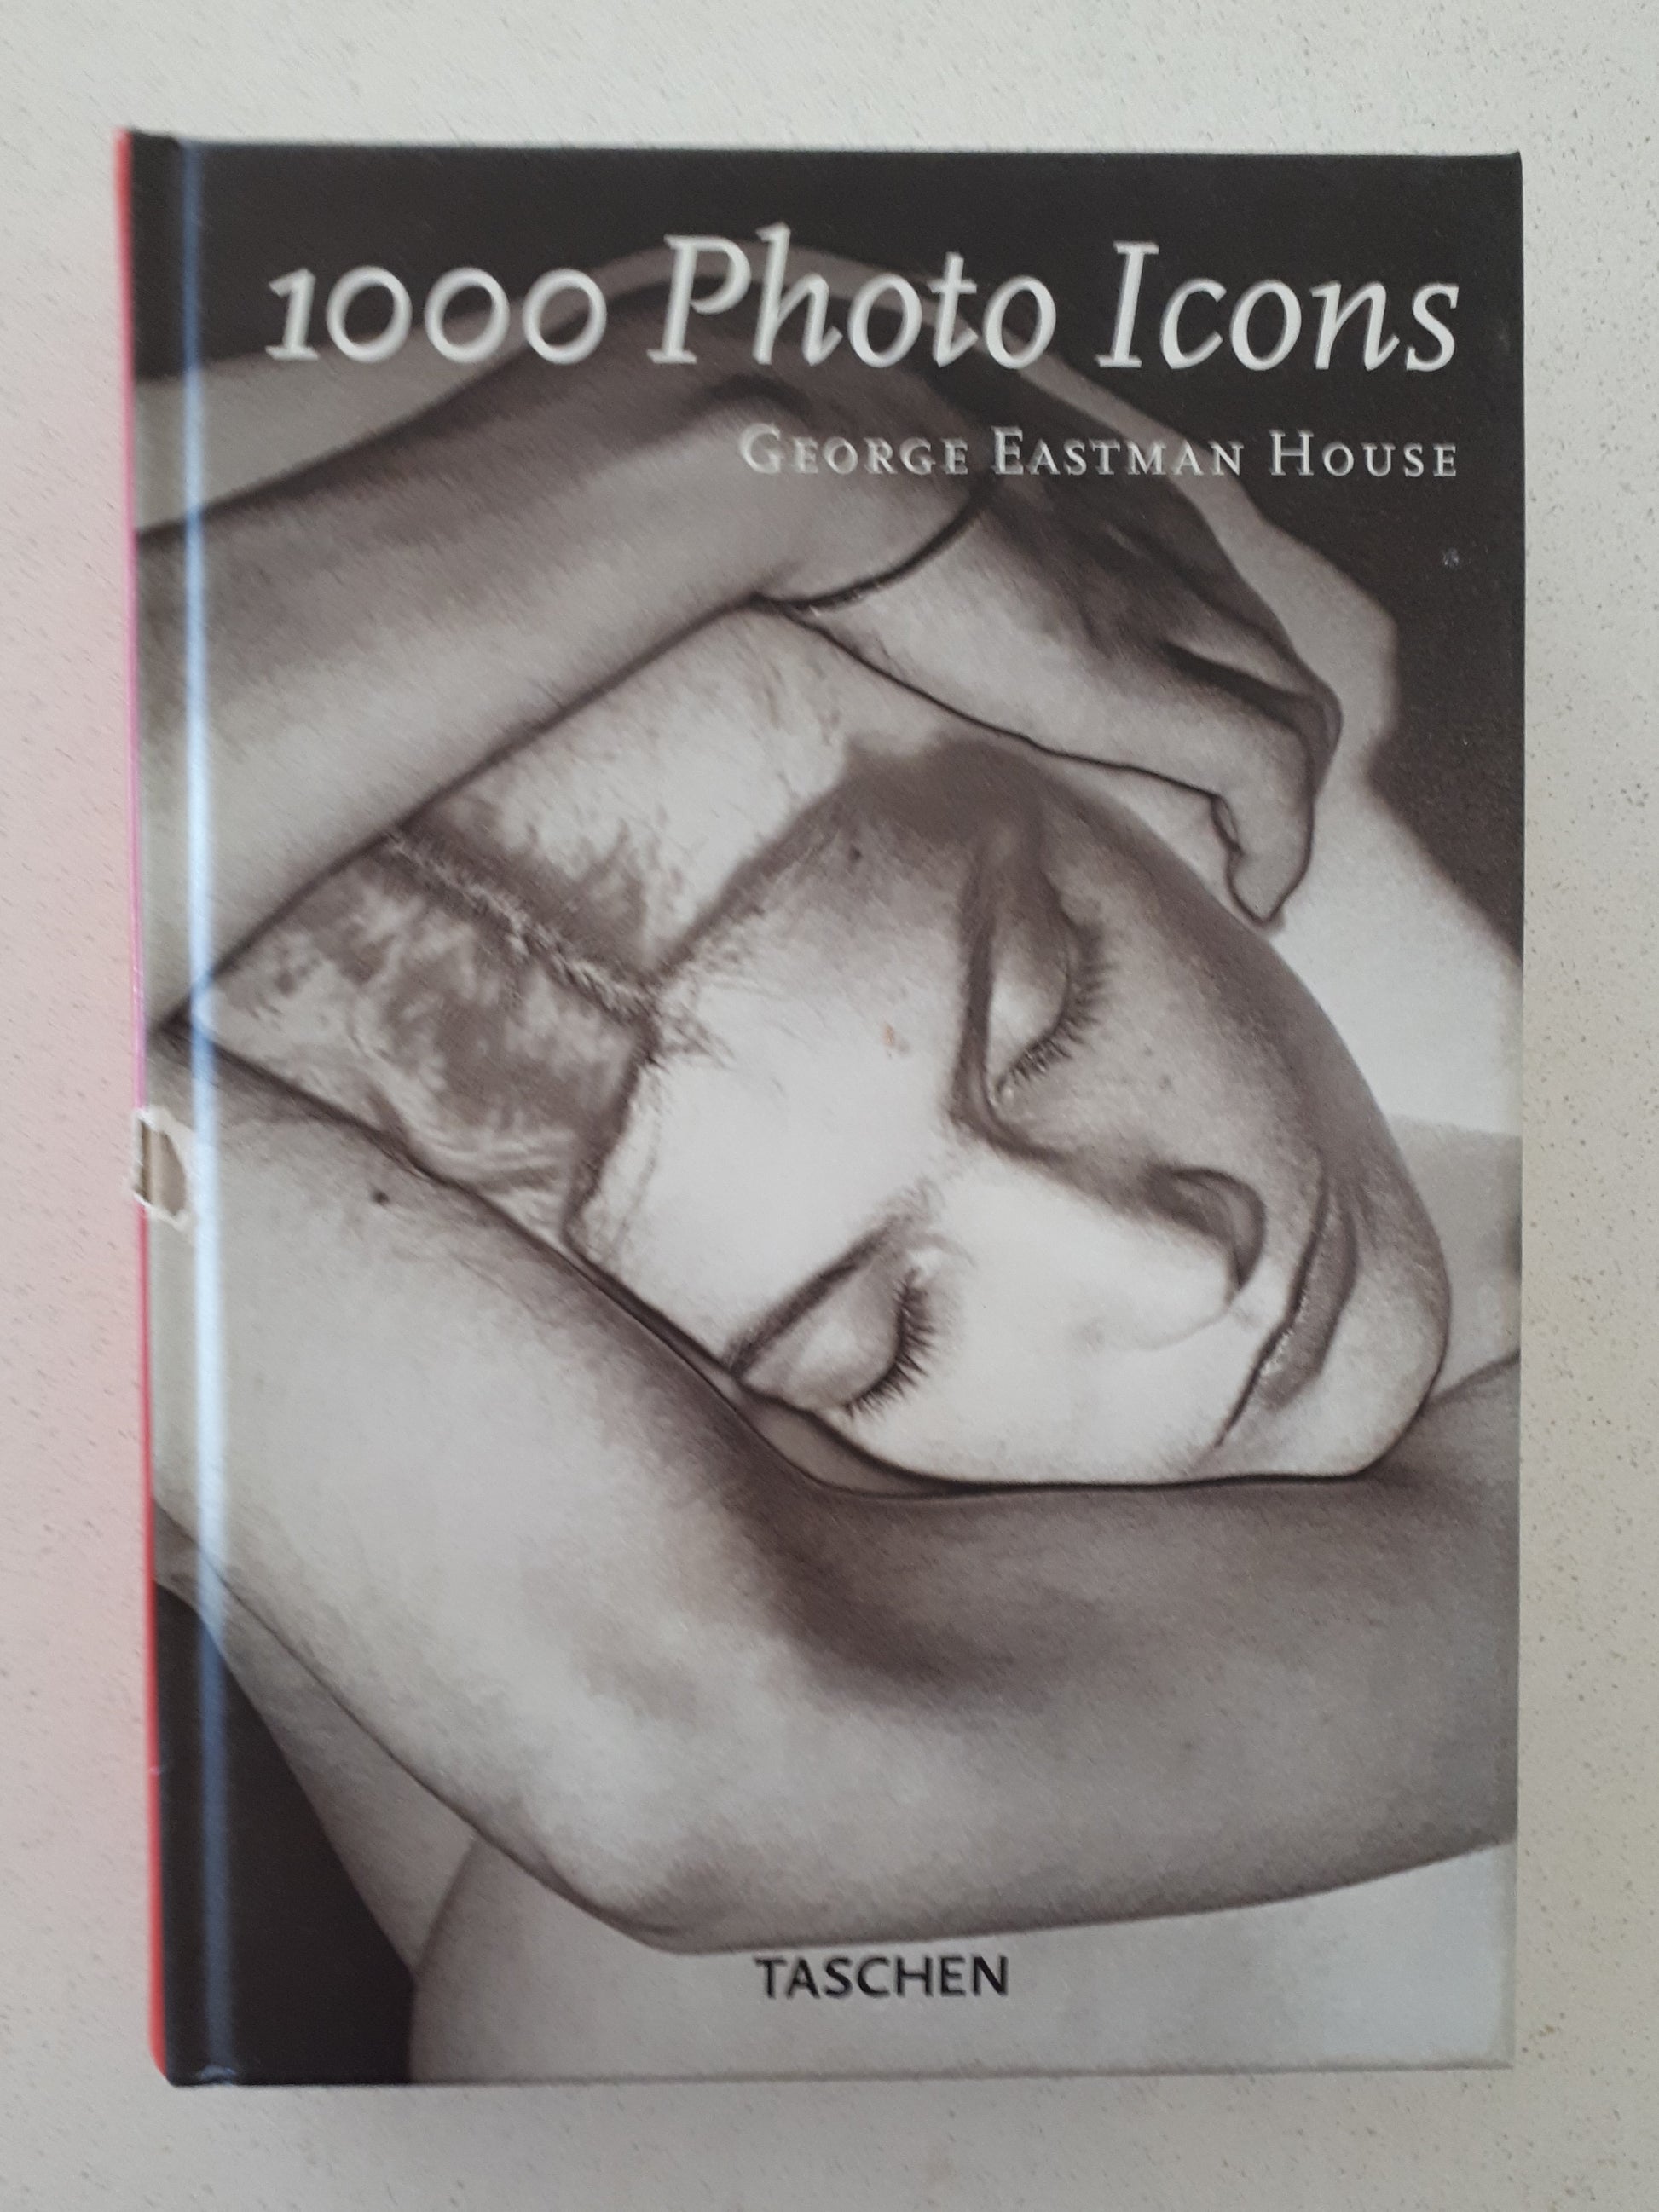 1000 Photo Icons by George Eastman House